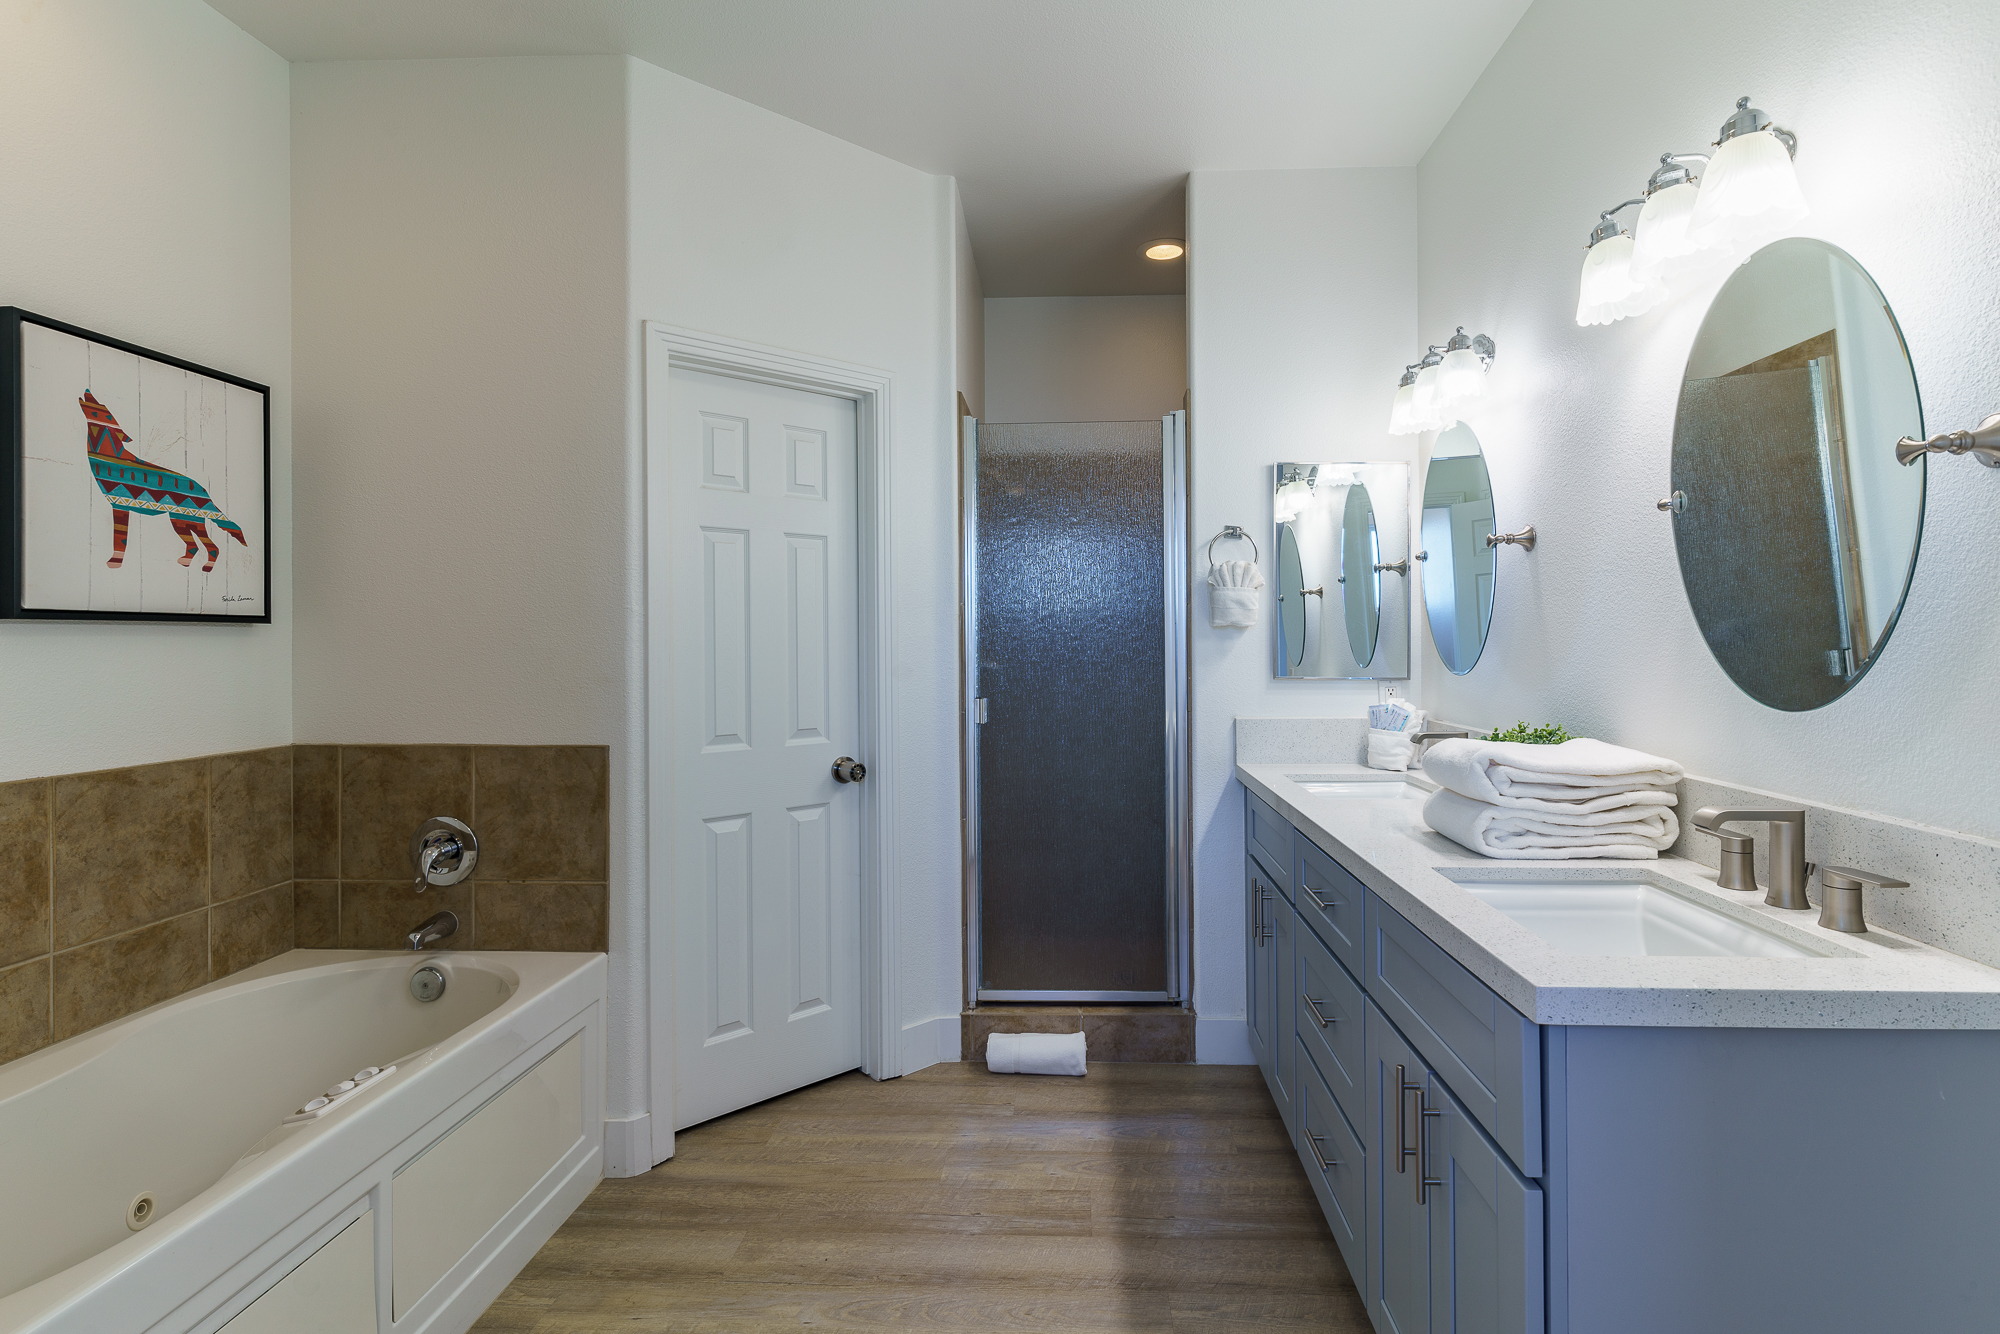 large bathroom with a jetted bathtub, walk-in showers, double sink vanity and two walk-in closets